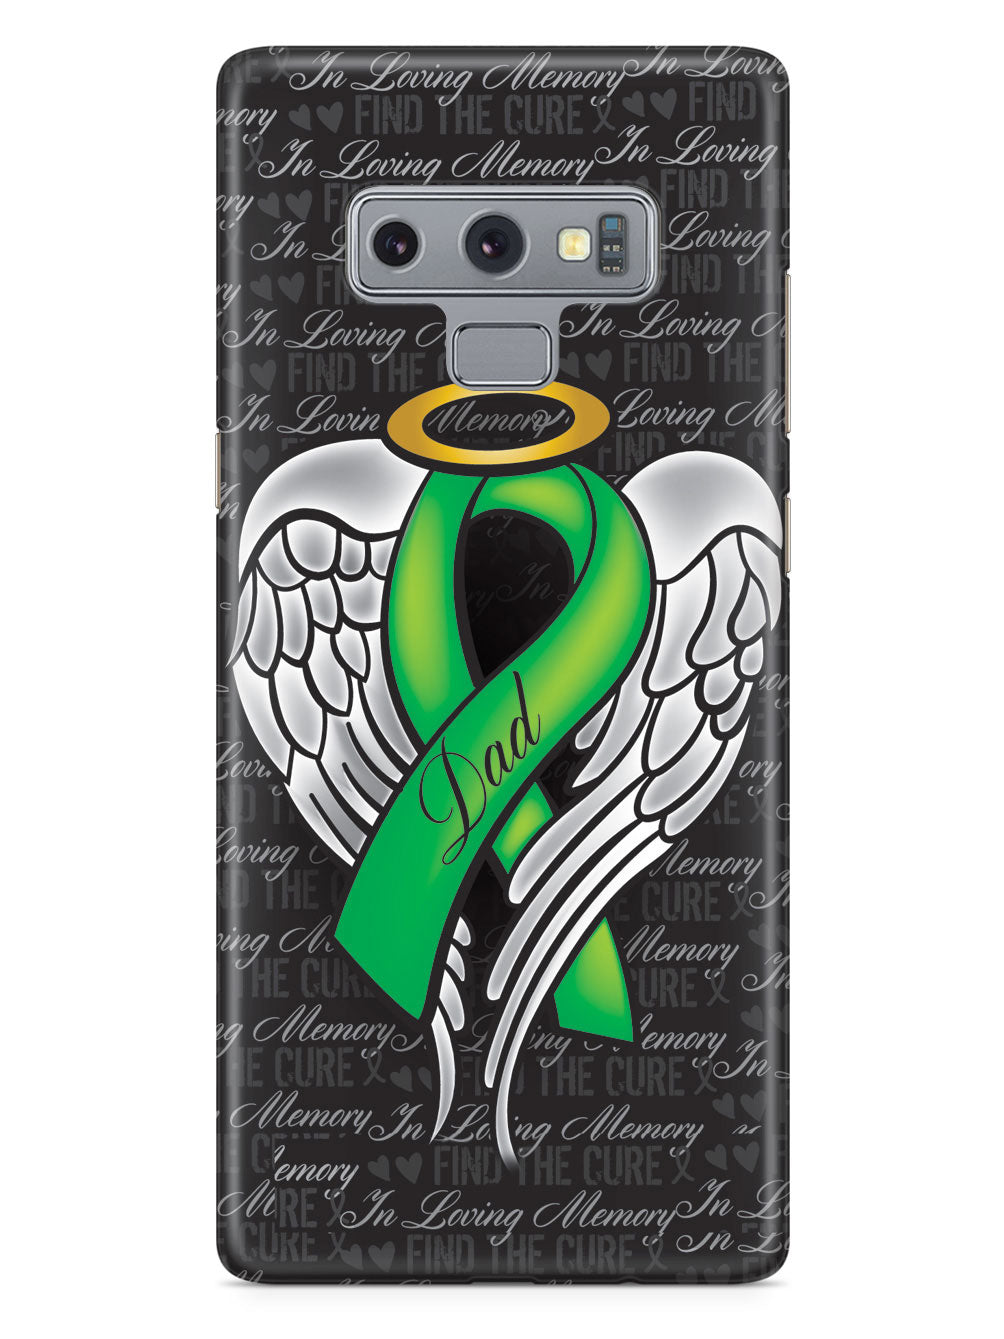 In Loving Memory of My Dad - Green Ribbon Case